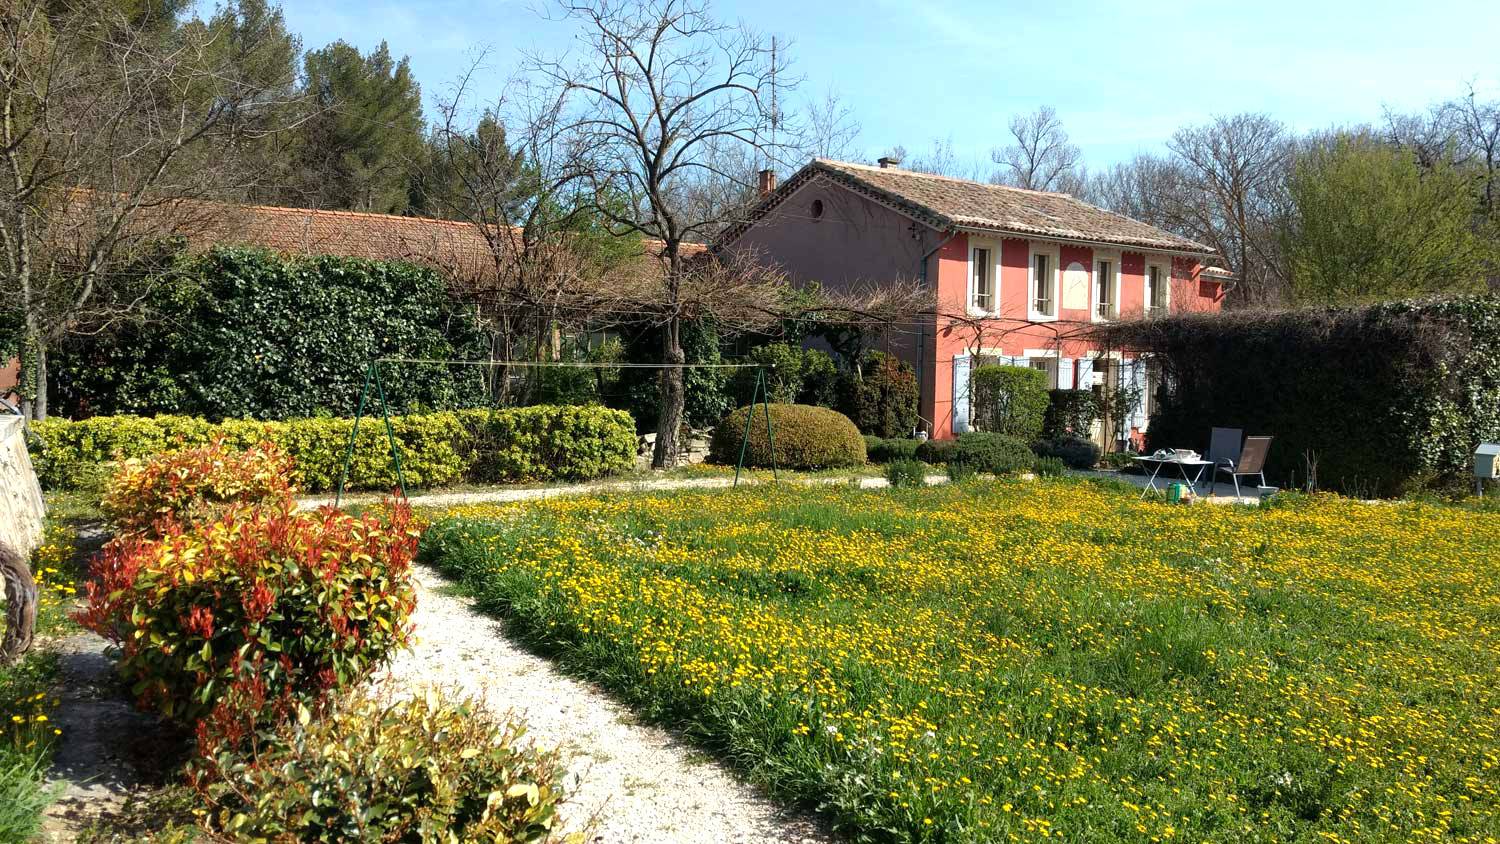 For sale in Vaucluse : early XIXth century mansion  with remarkable view in Carpentras